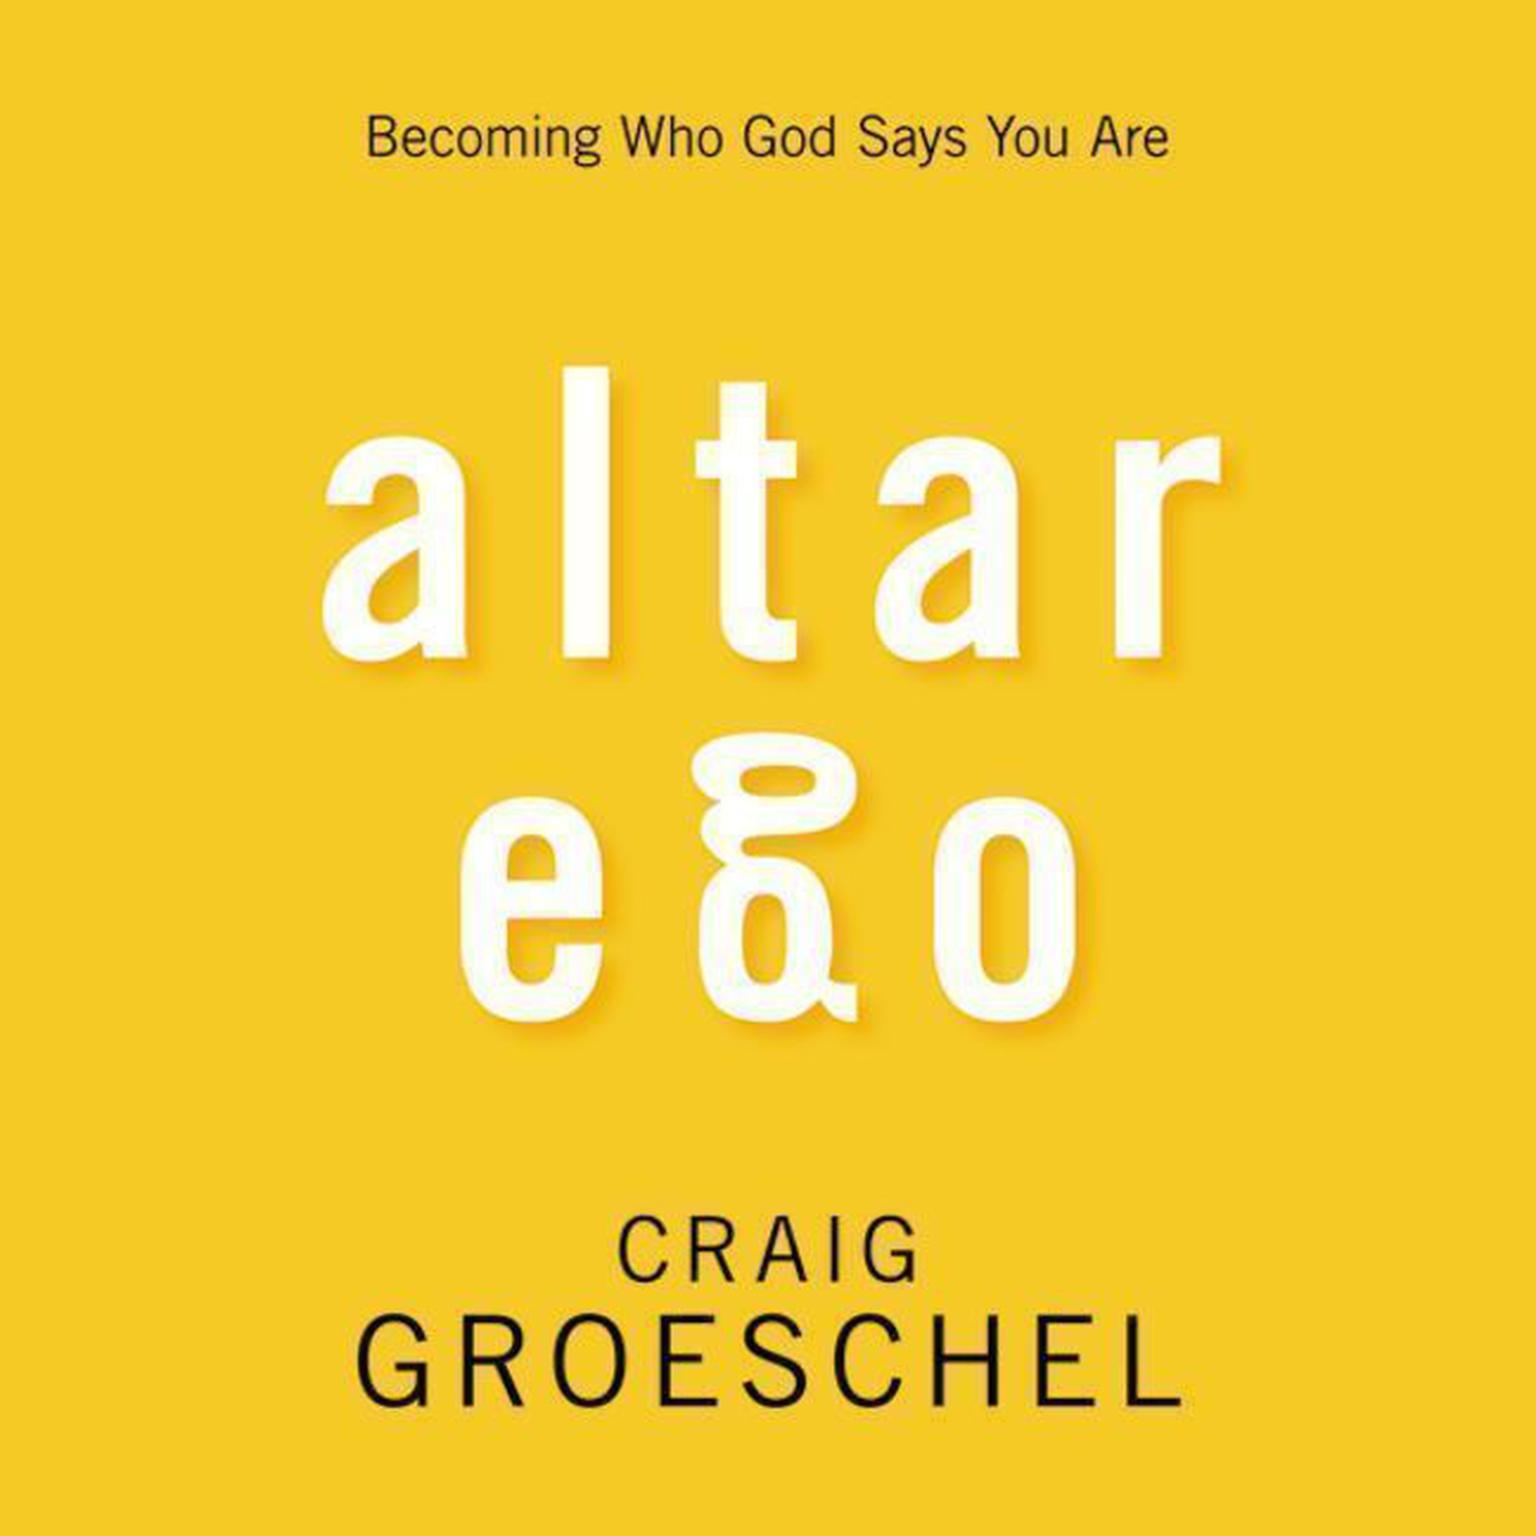 Altar Ego: Becoming Who God Says You Are Audiobook, by Craig Groeschel